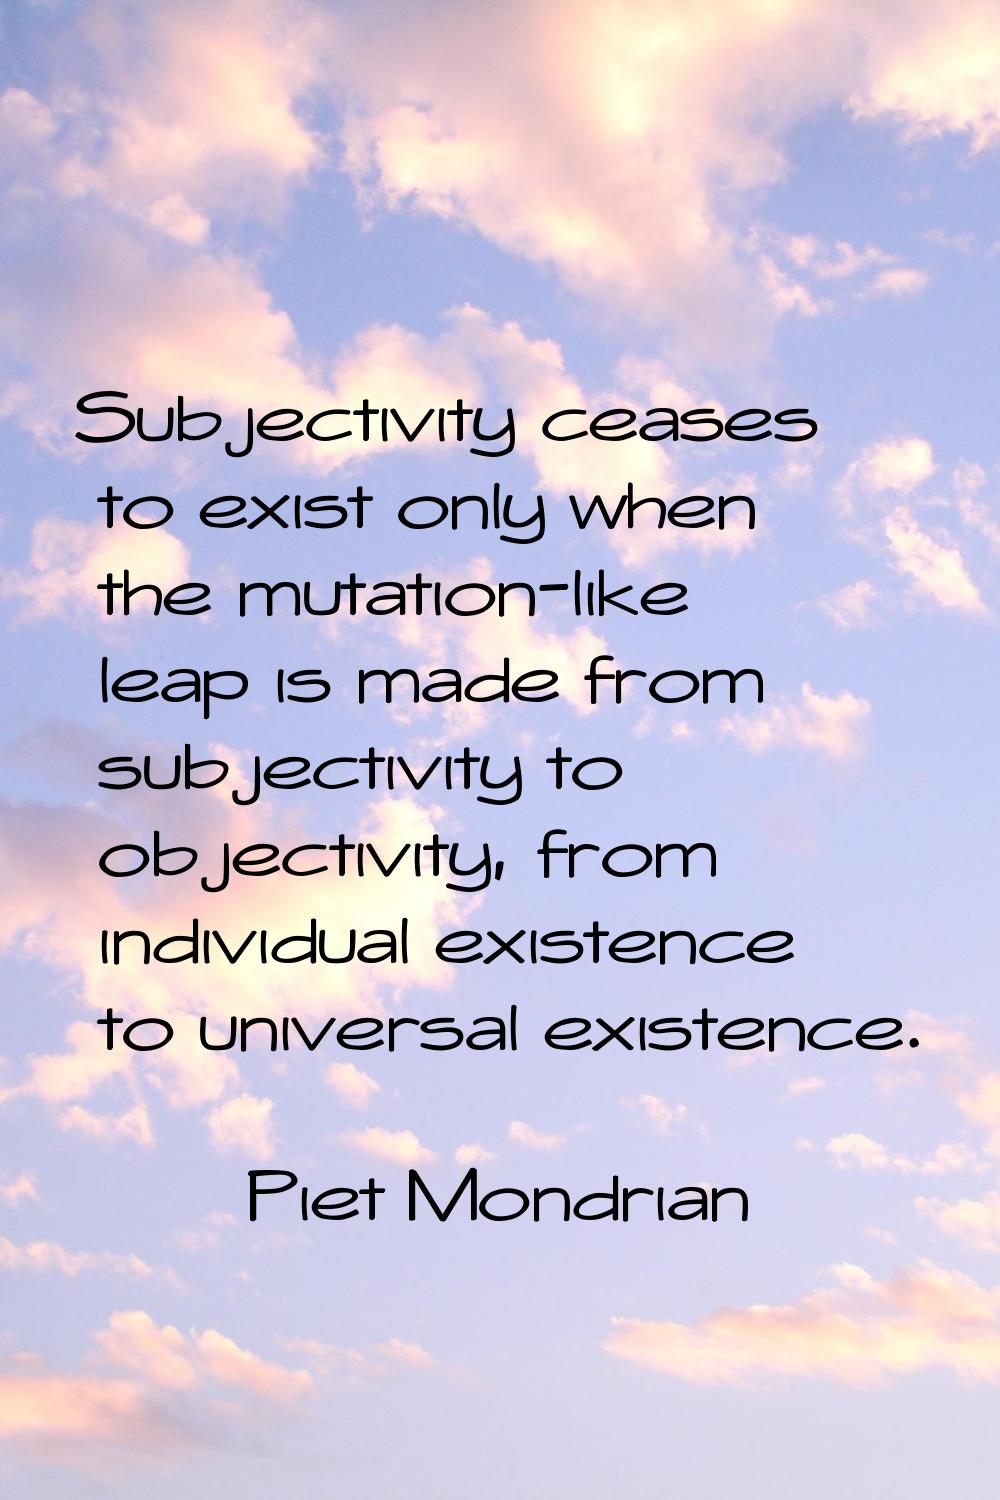 Subjectivity ceases to exist only when the mutation-like leap is made from subjectivity to objectiv